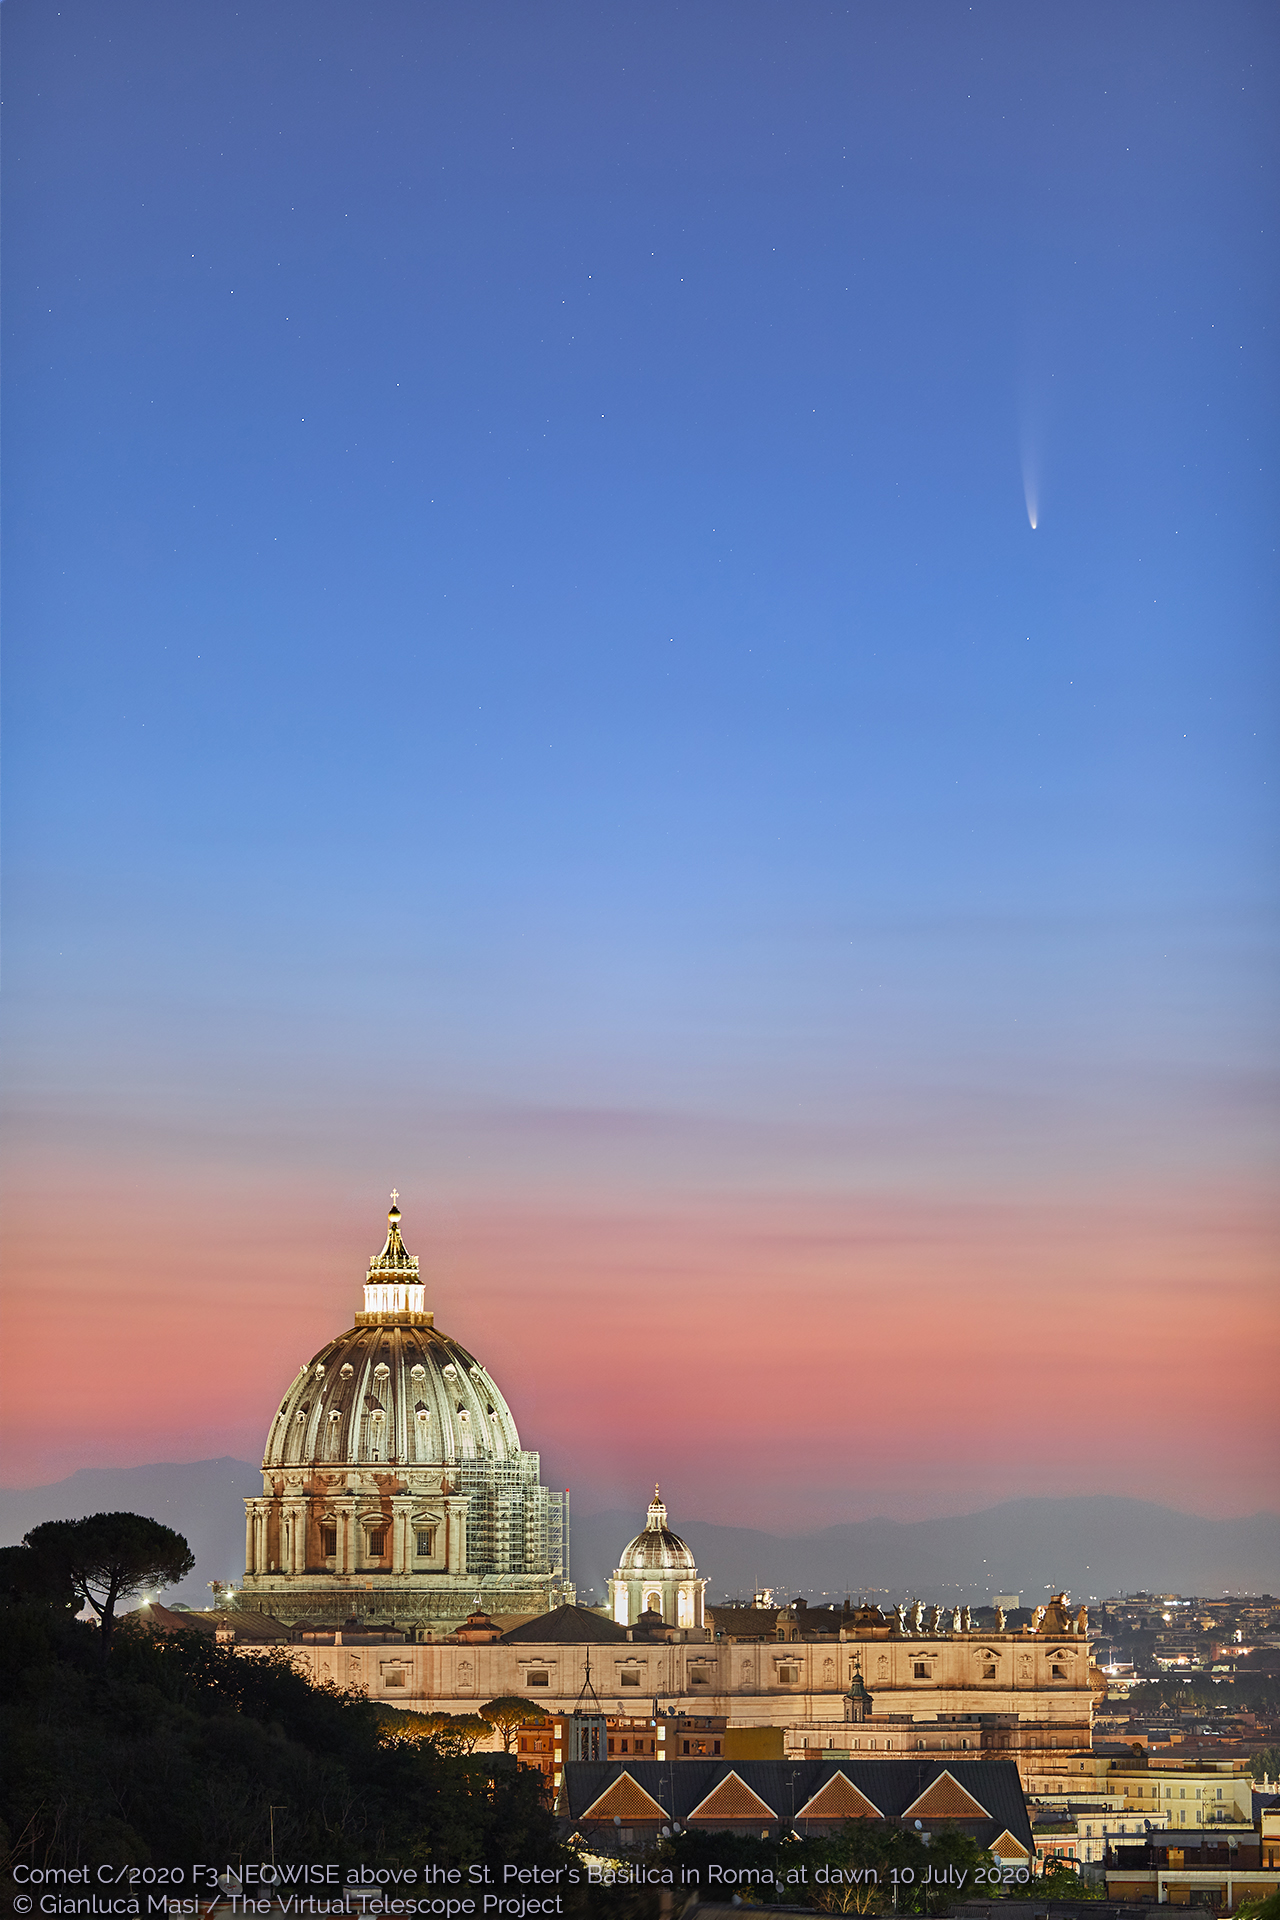 Comet C/2020 F3 NEOWISE shines above the St. Peter's Dome in Rome - 10 July 2020.